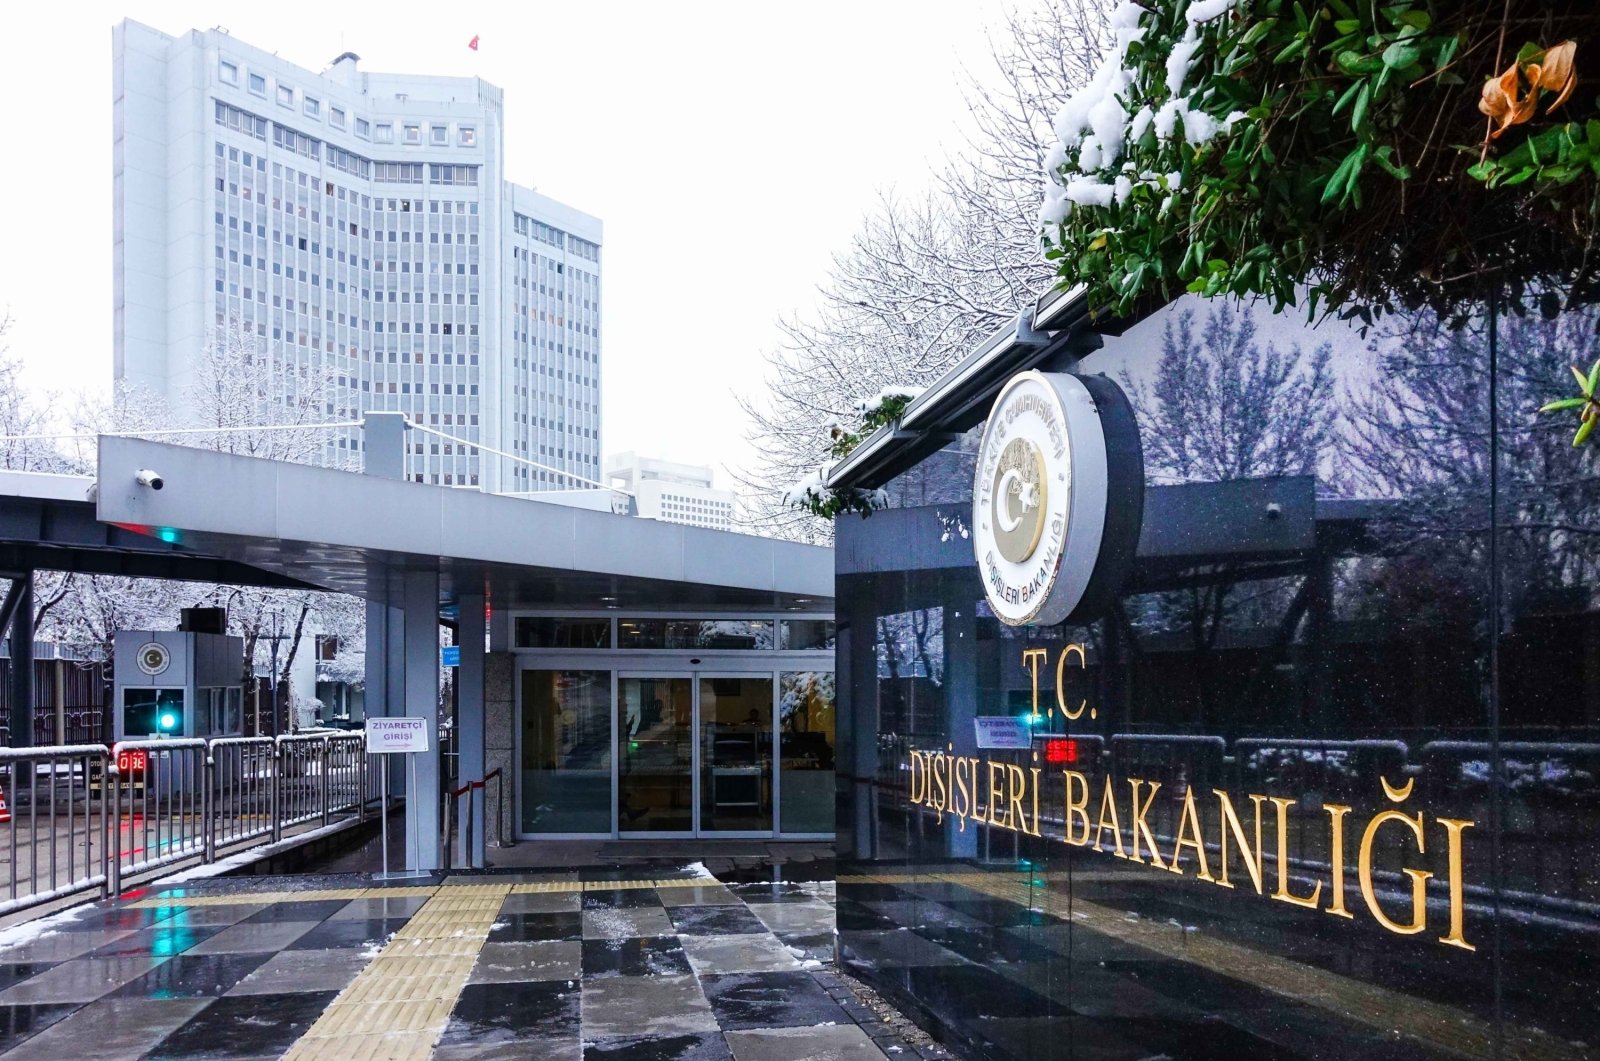 Foreign Ministry headquarters in Ankara, Turkey in this undated photo. (File Photo)